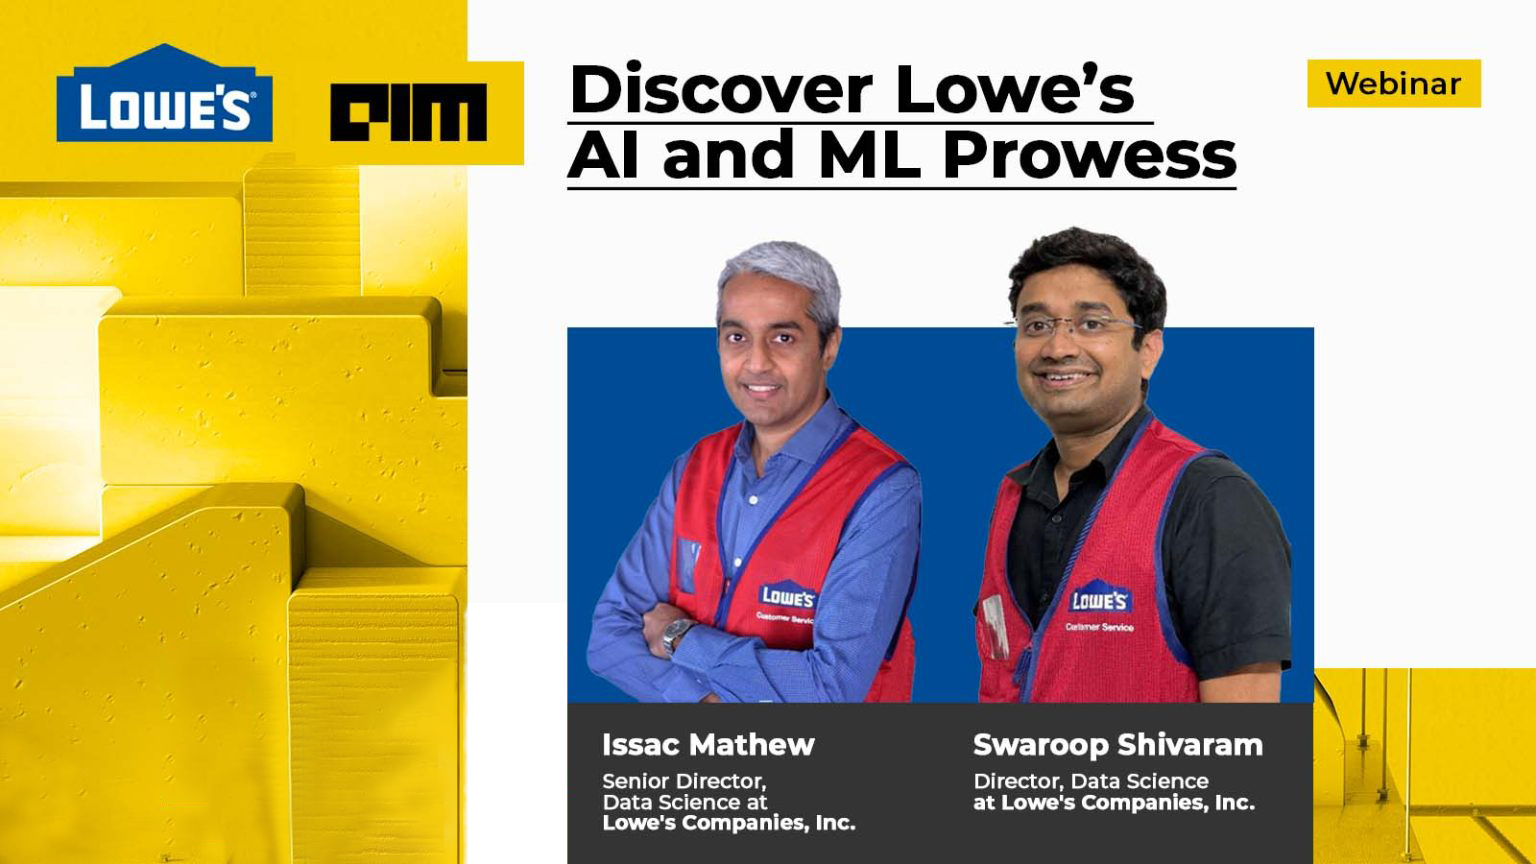 Discovering Lowe's AI and ML Prowess